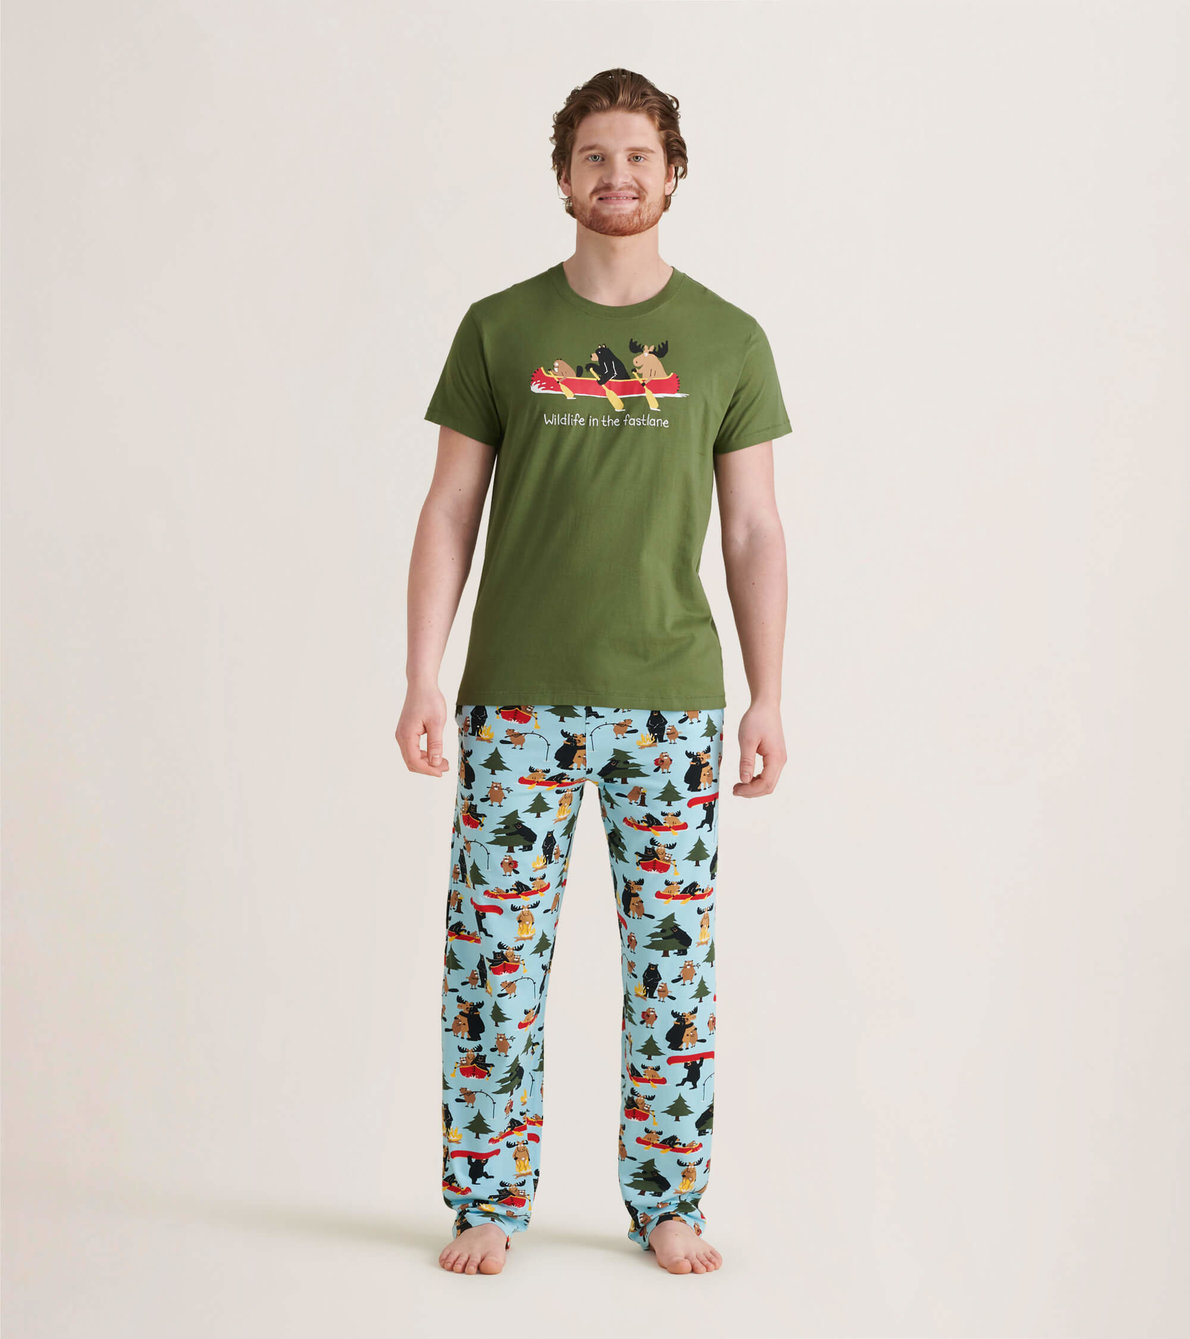 View larger image of Life in the Wild Men's Tee and Pants Pajama Separates